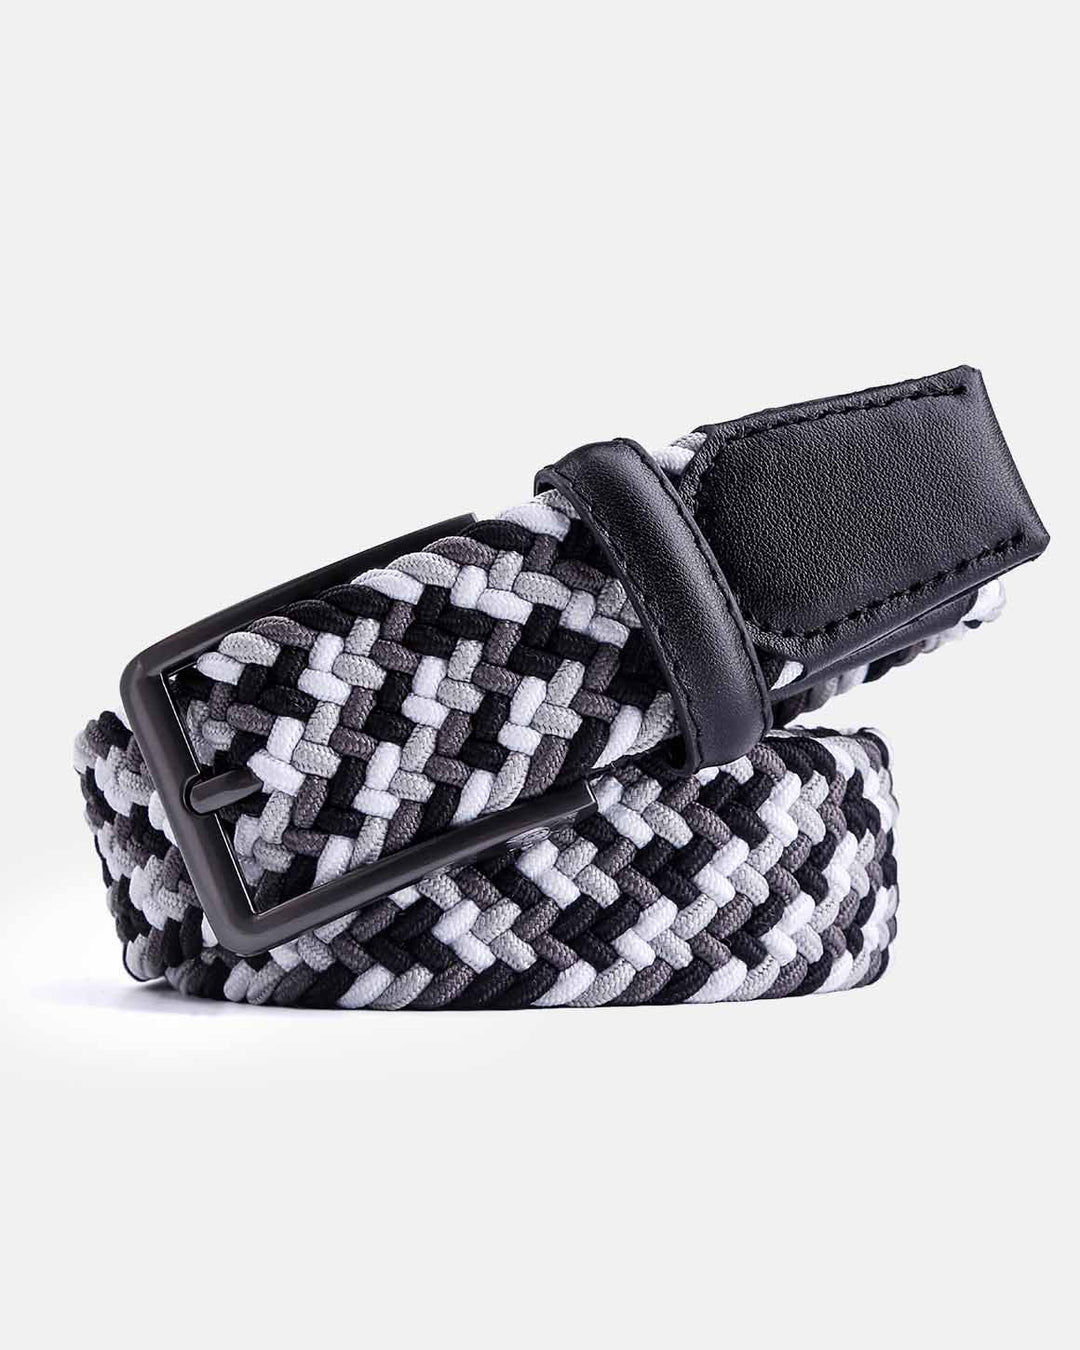 Ghost Golf Black/Grey/Off White Multi Color Belt with Gun Metal Steel Buckle and Black Leather Tail